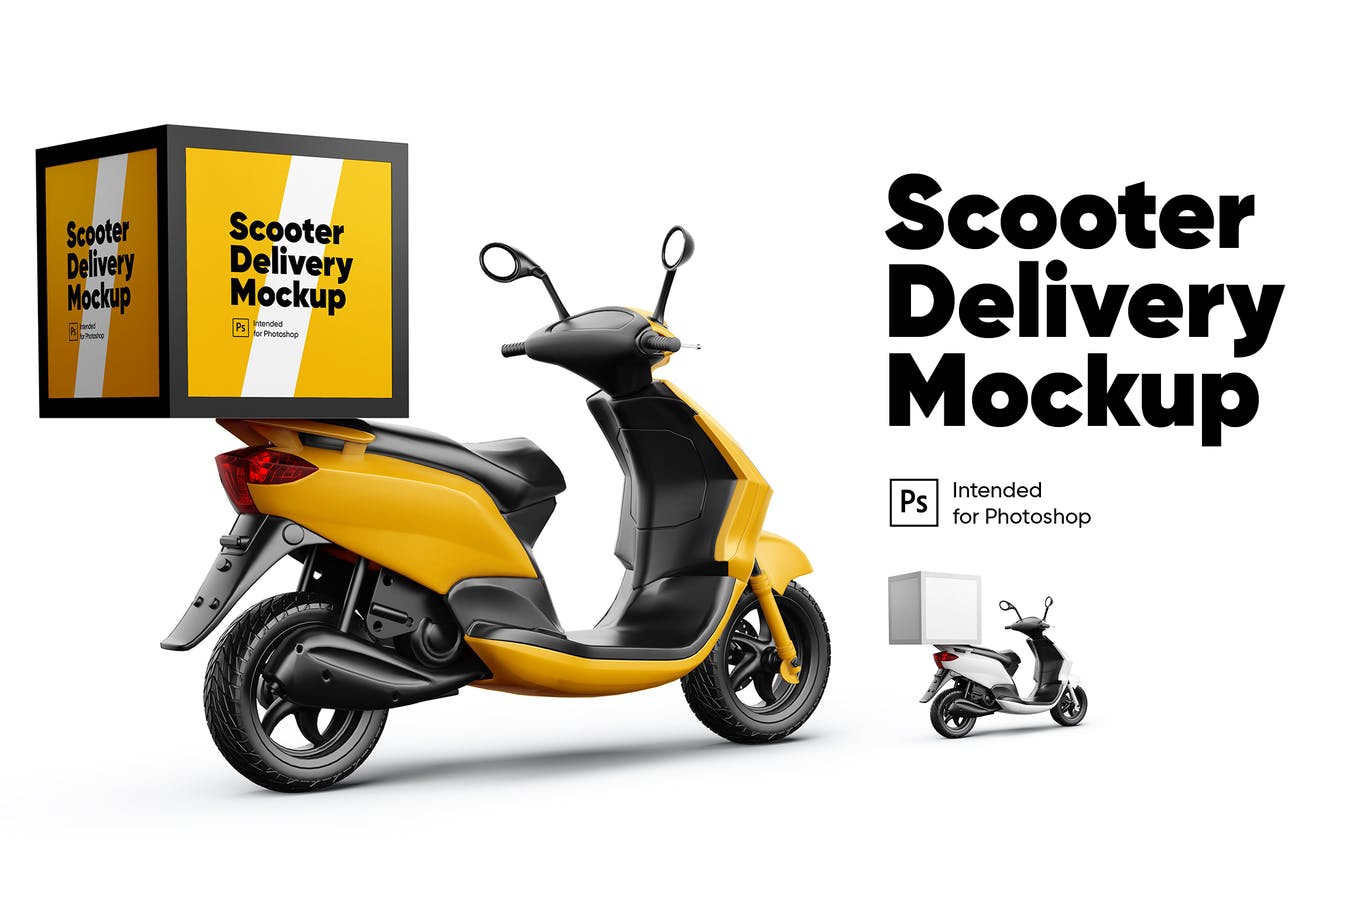 Download Scooter Delivery Mockup - Premium creative assets